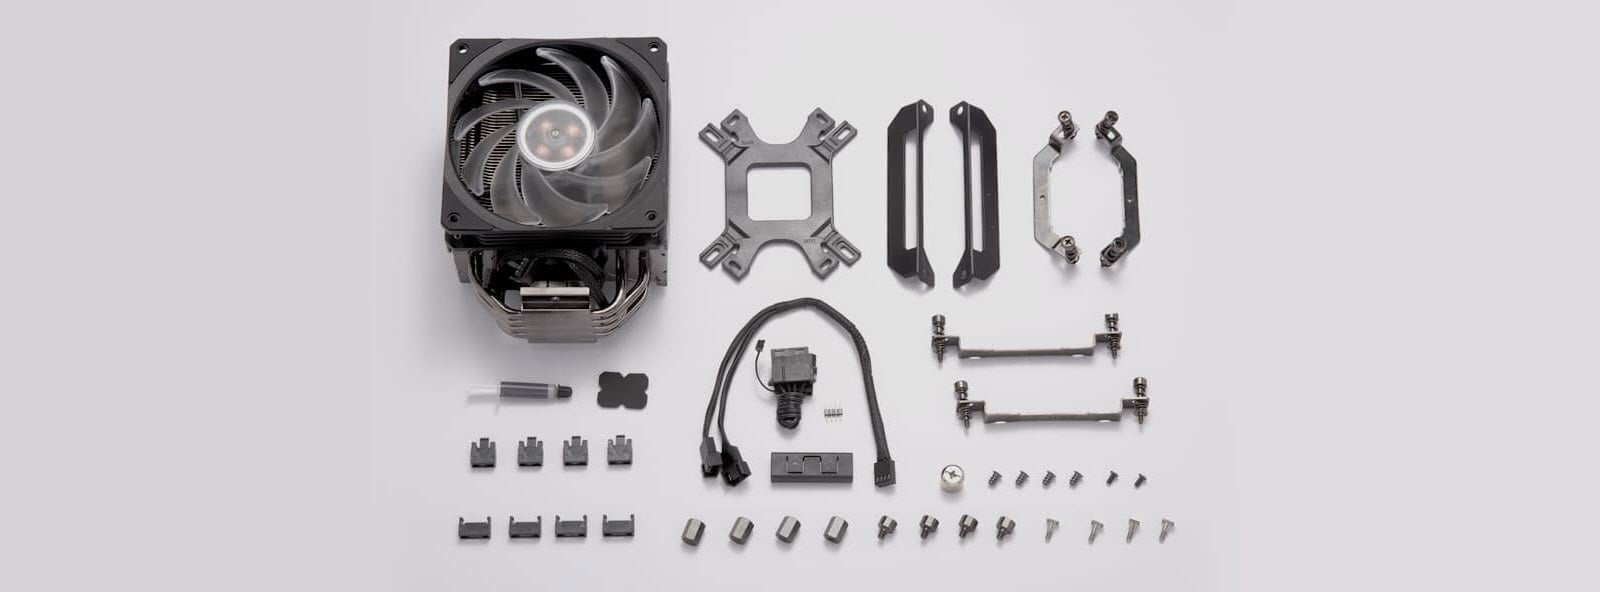 all the components included in the box